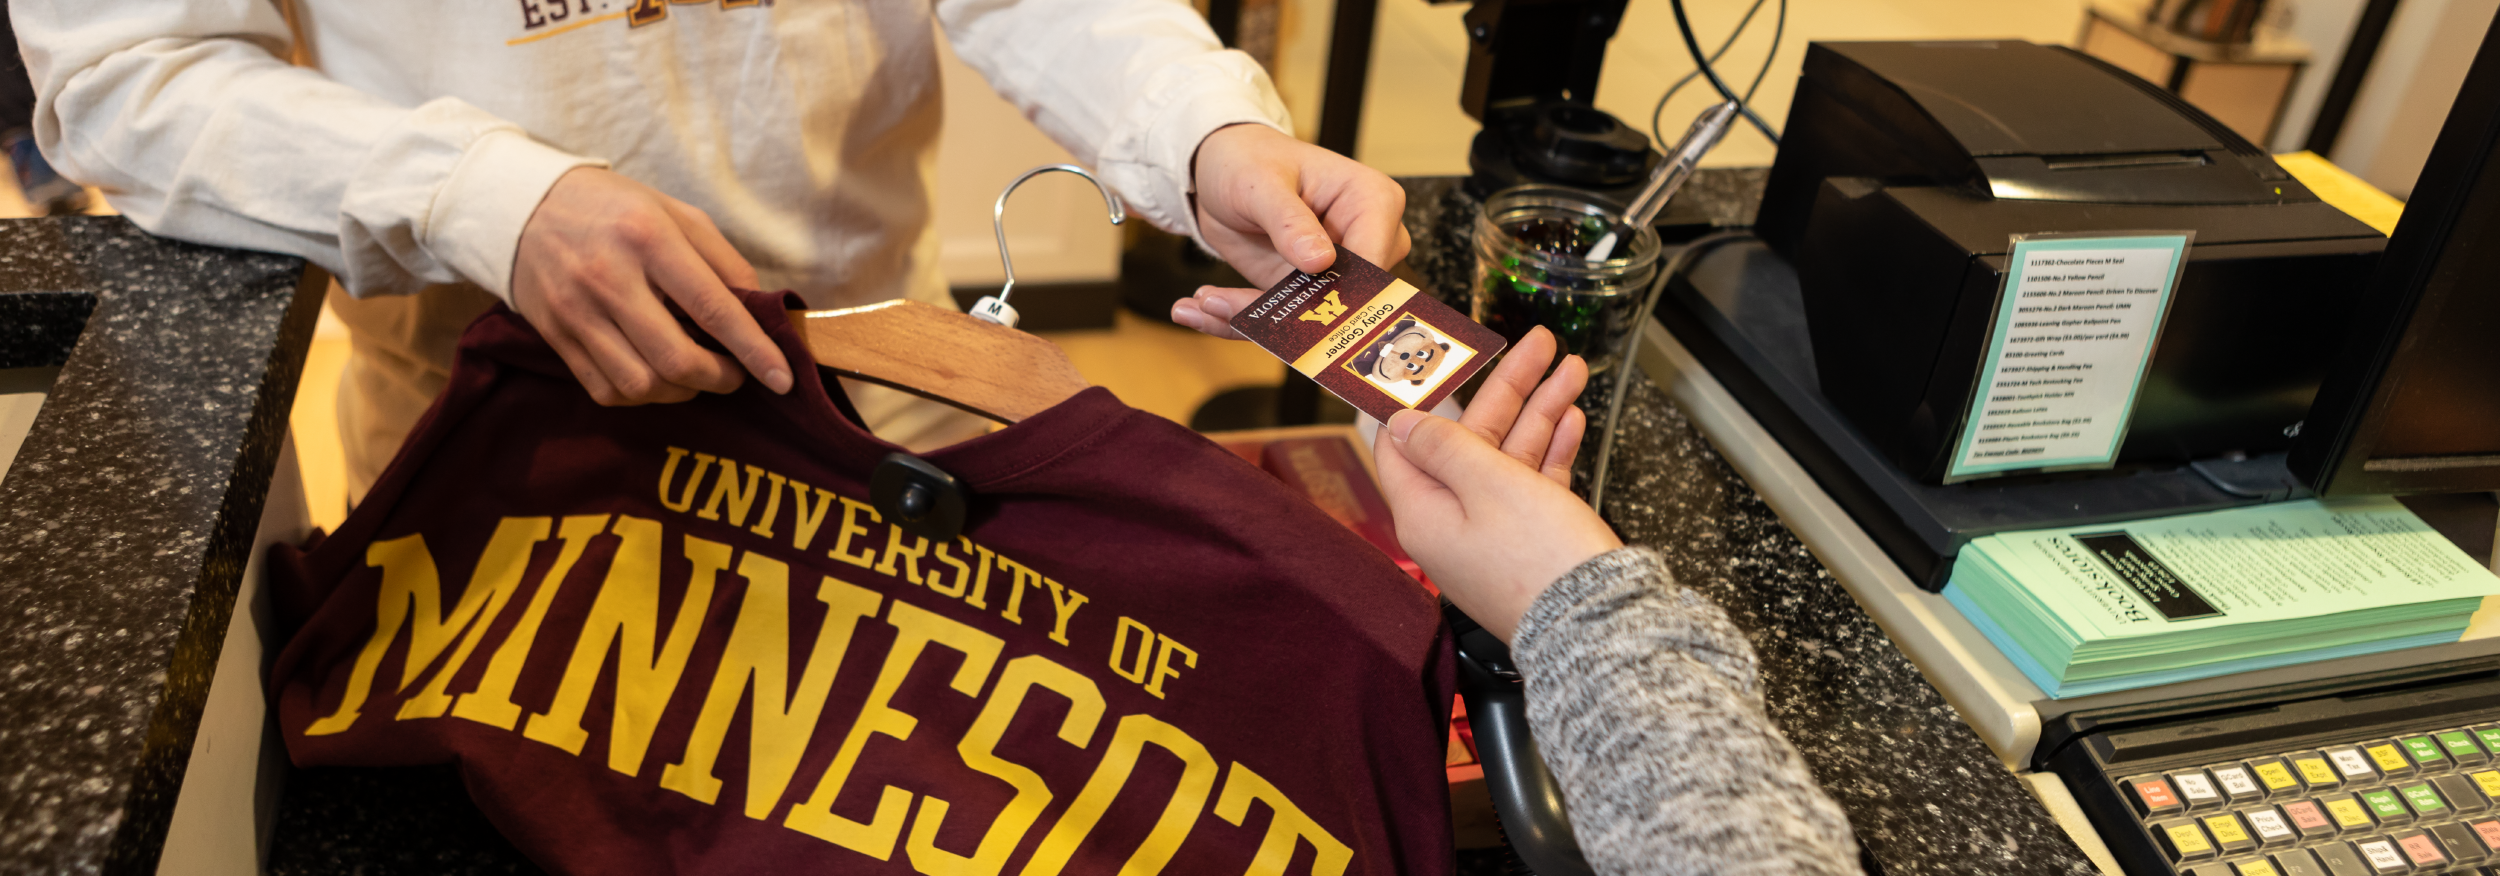 Student purchasing a sweatshirt with their U Card at the U of M Bookstore